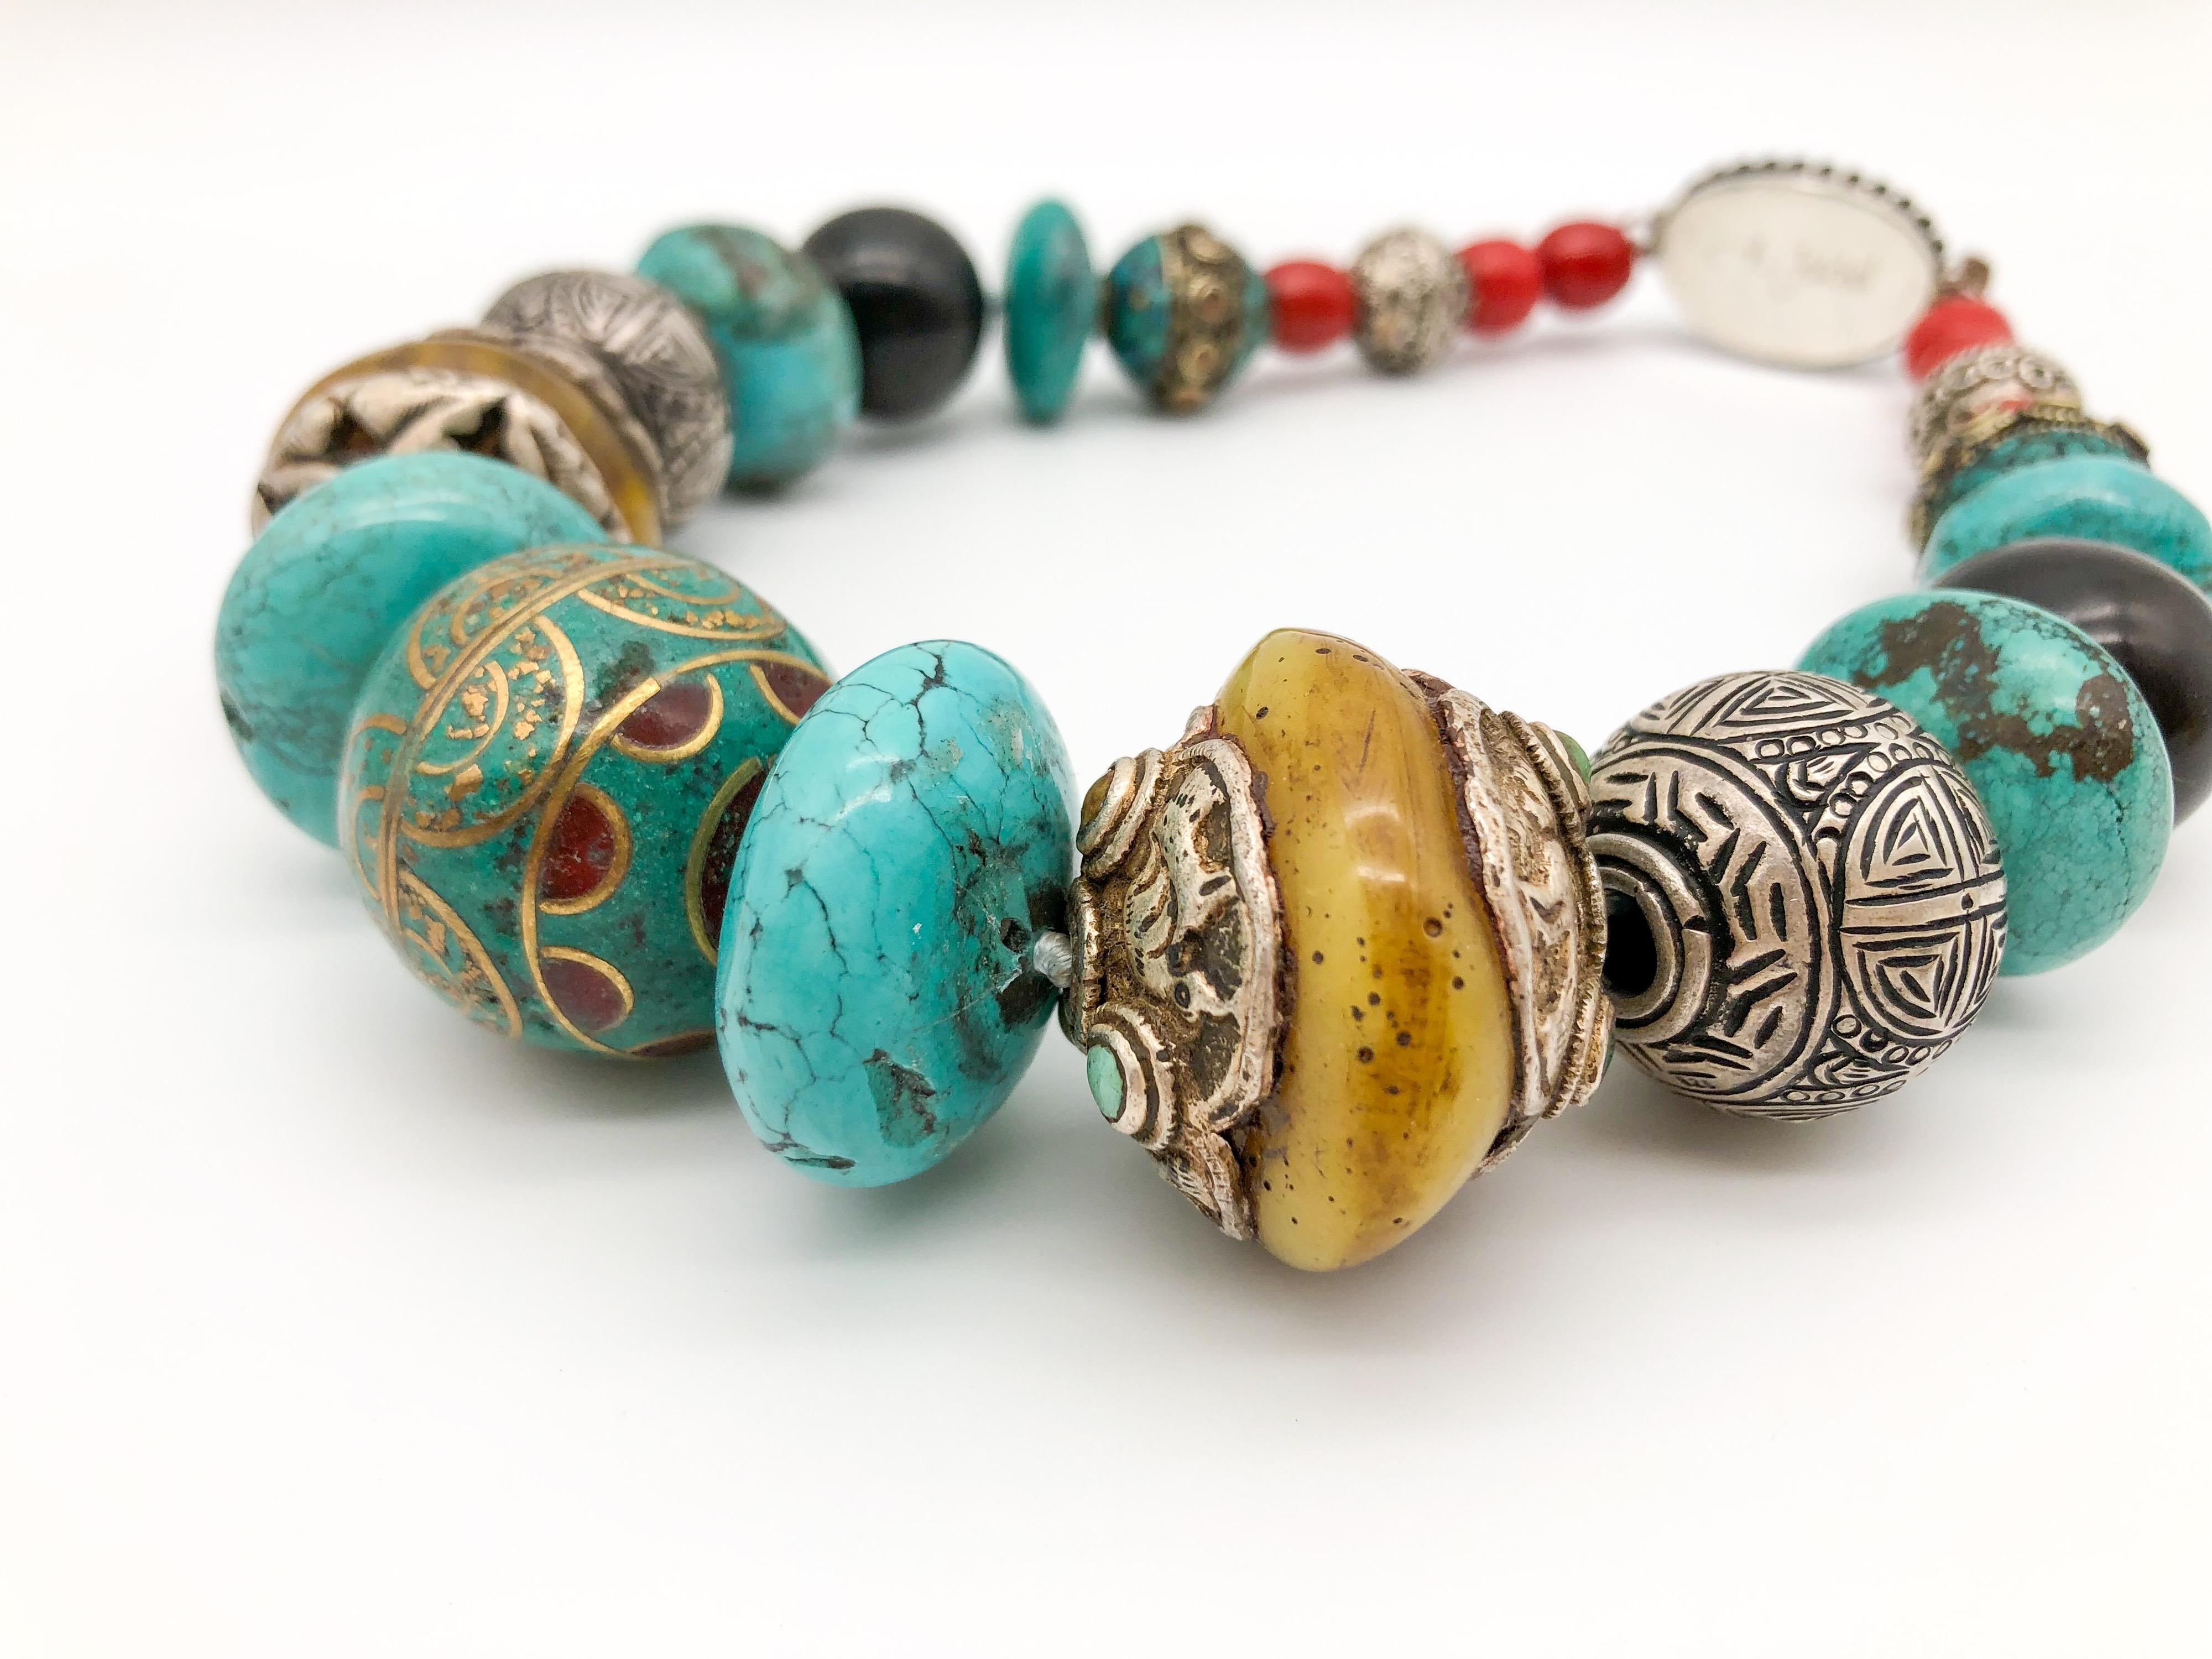 Contemporary A.Jeschel Powerful Turquoise necklace with a large center bead of Tibetan. 